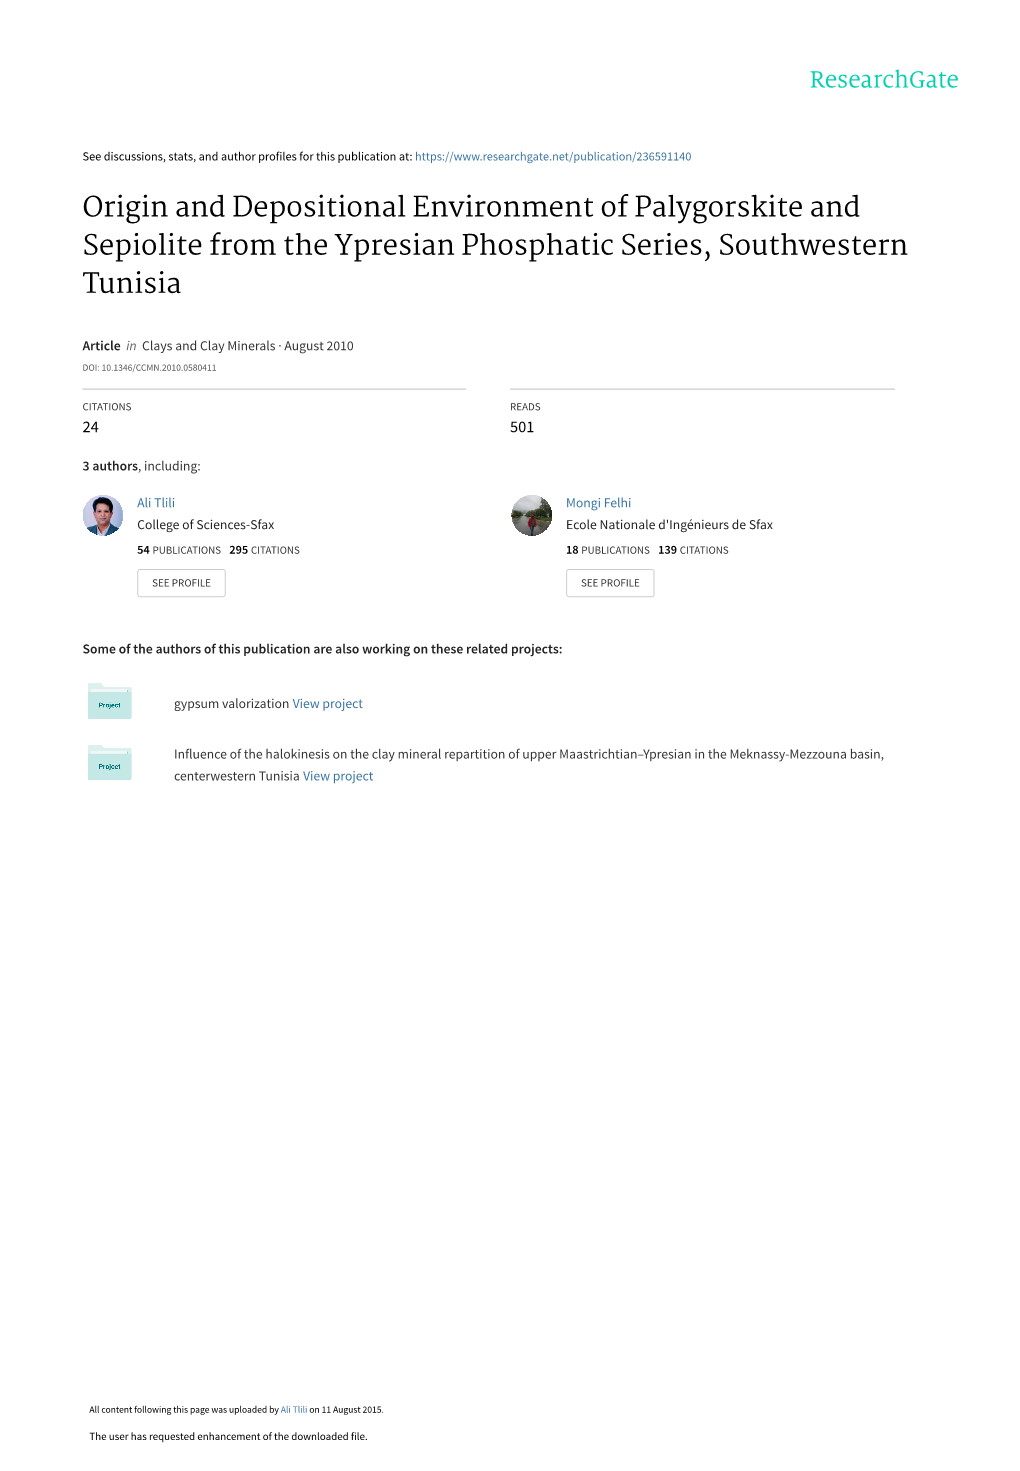 Origin and Depositional Environment of Palygorskite and Sepiolite from the Ypresian Phosphatic Series, Southwestern Tunisia